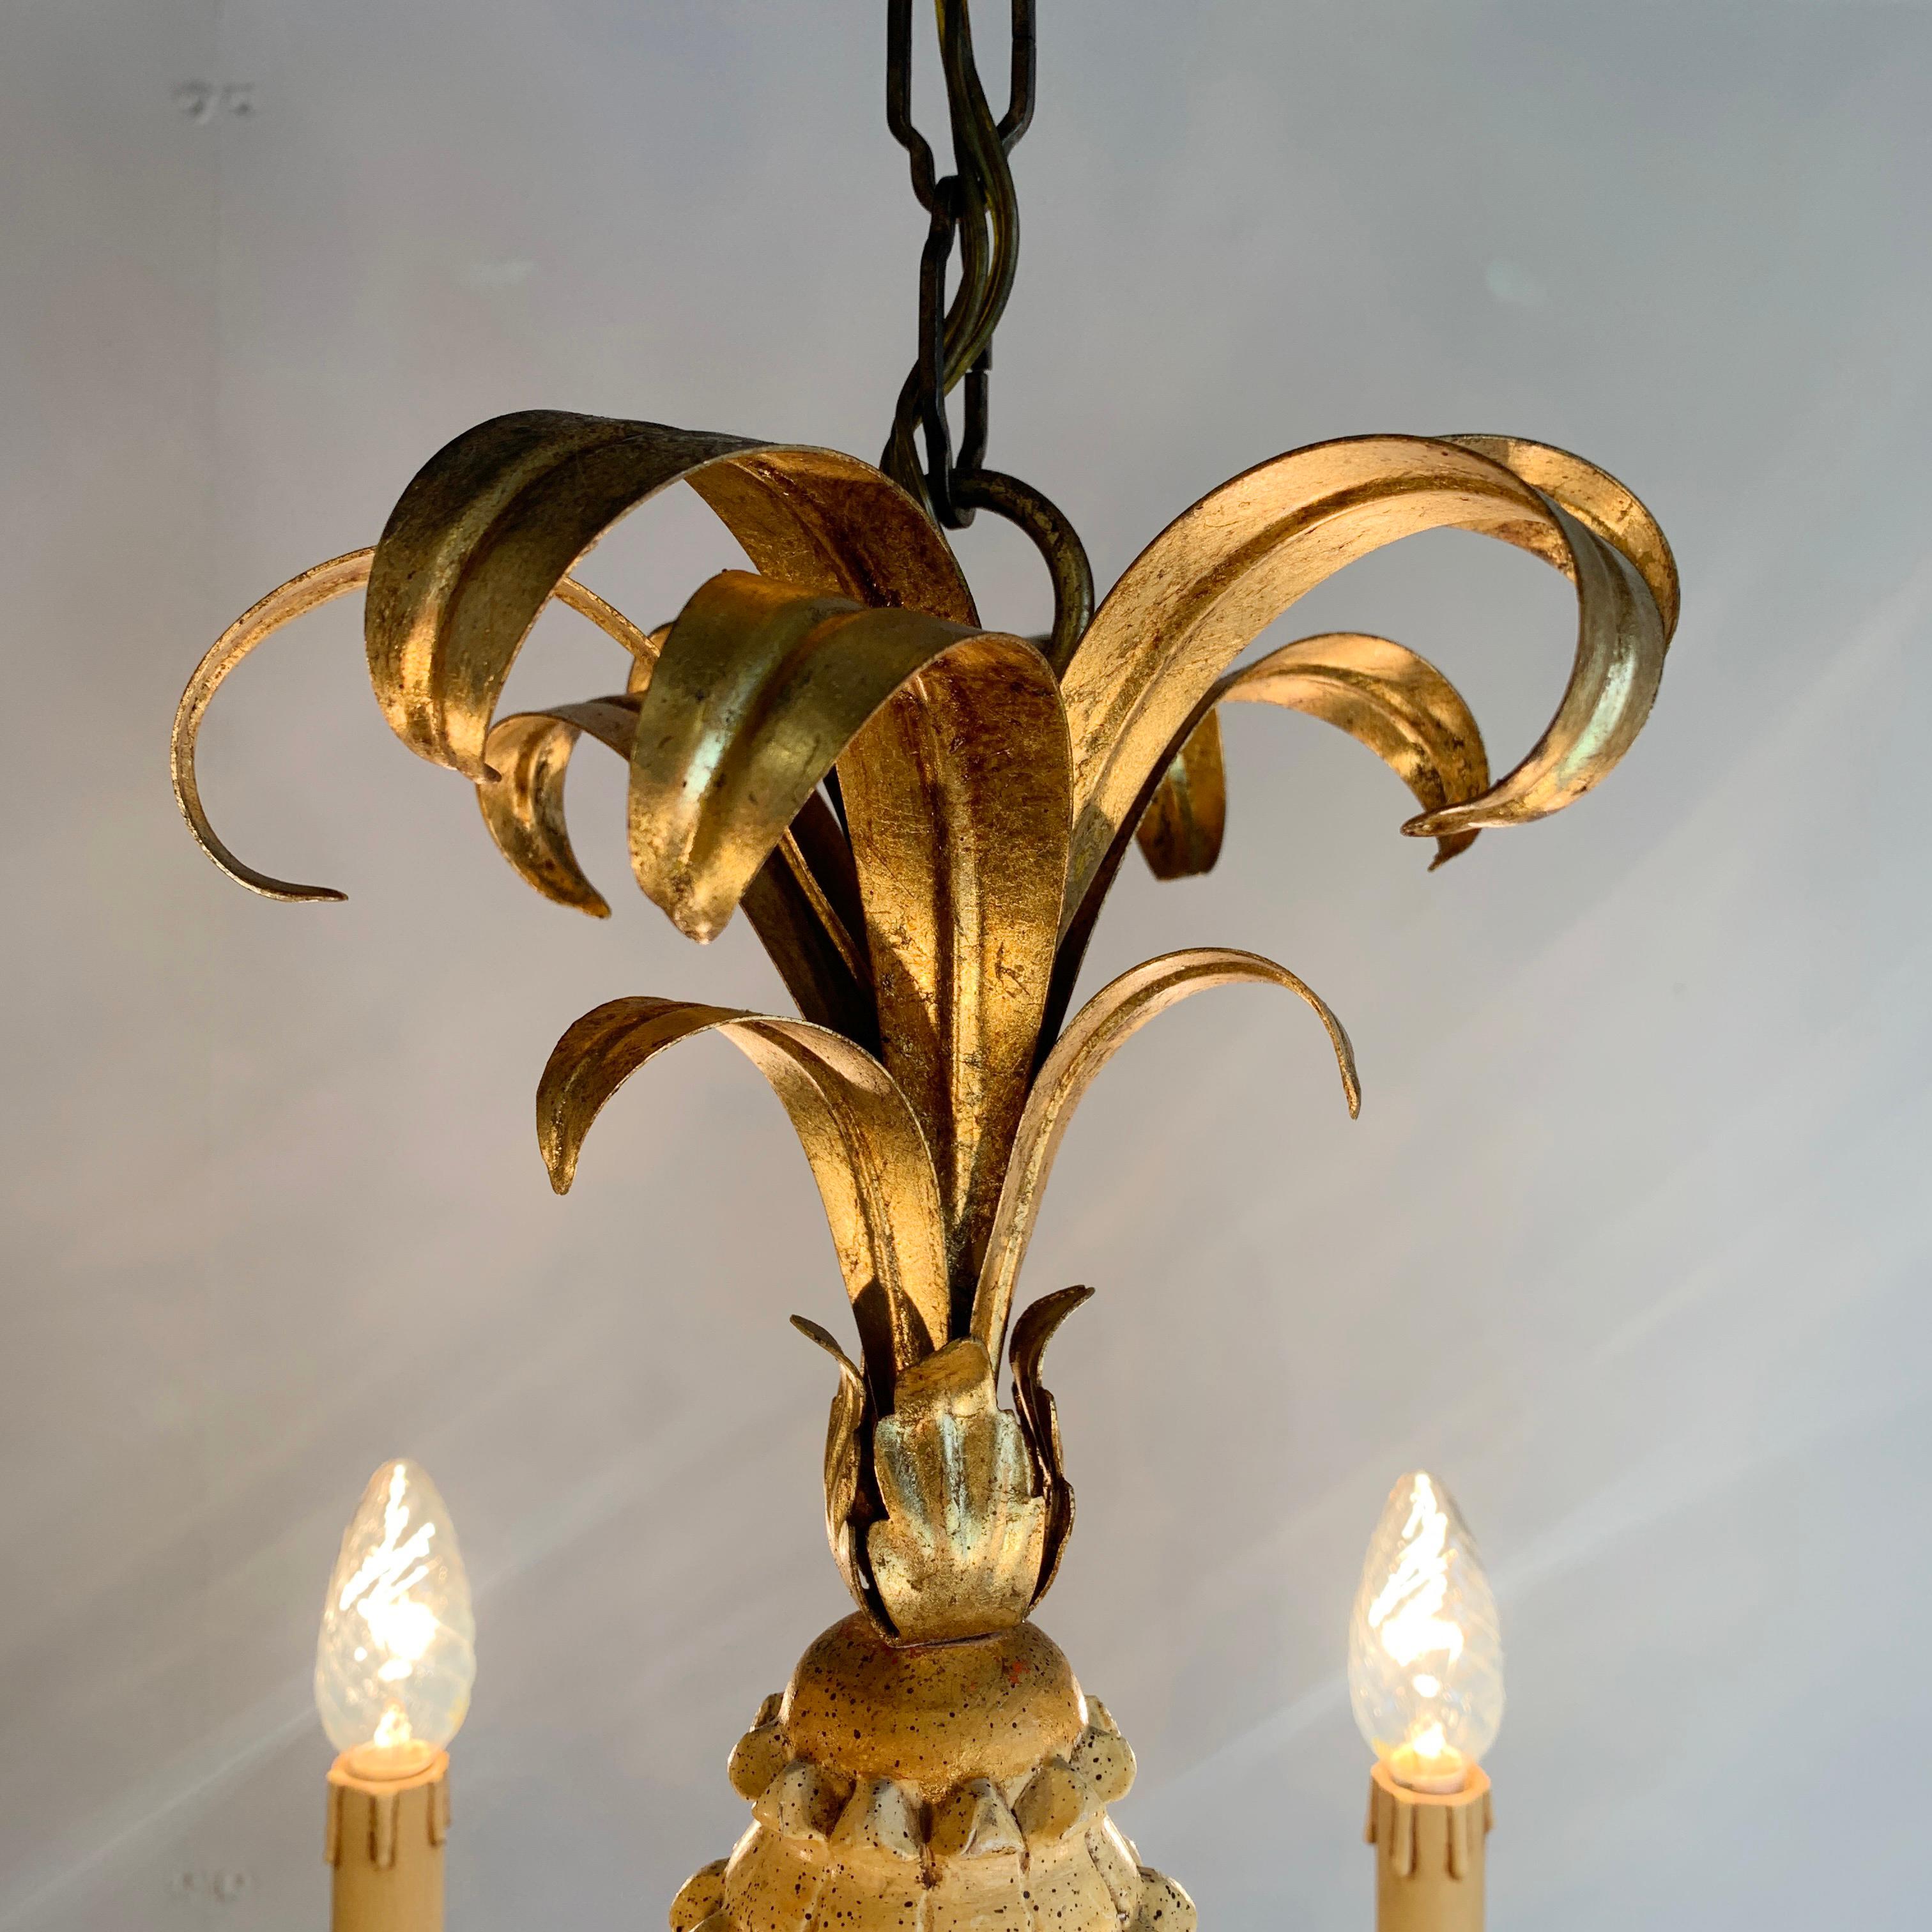 Italian Pineapple Chandelier Cream Carved Wood 1970s For Sale 2